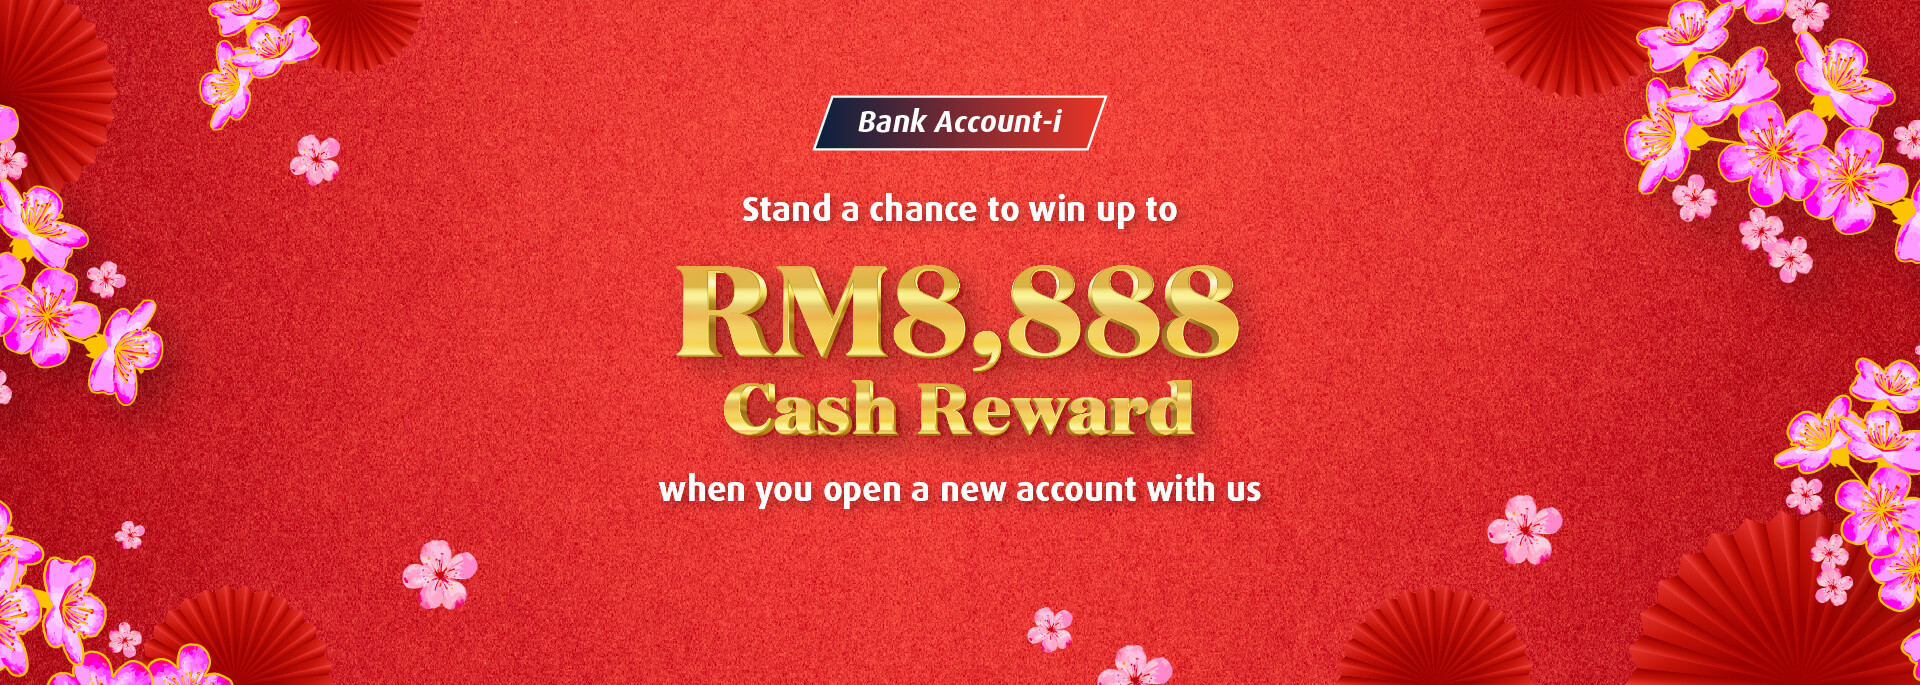 Stand a chance to win up to RM8,888 Cash Reward when you open a new account with us